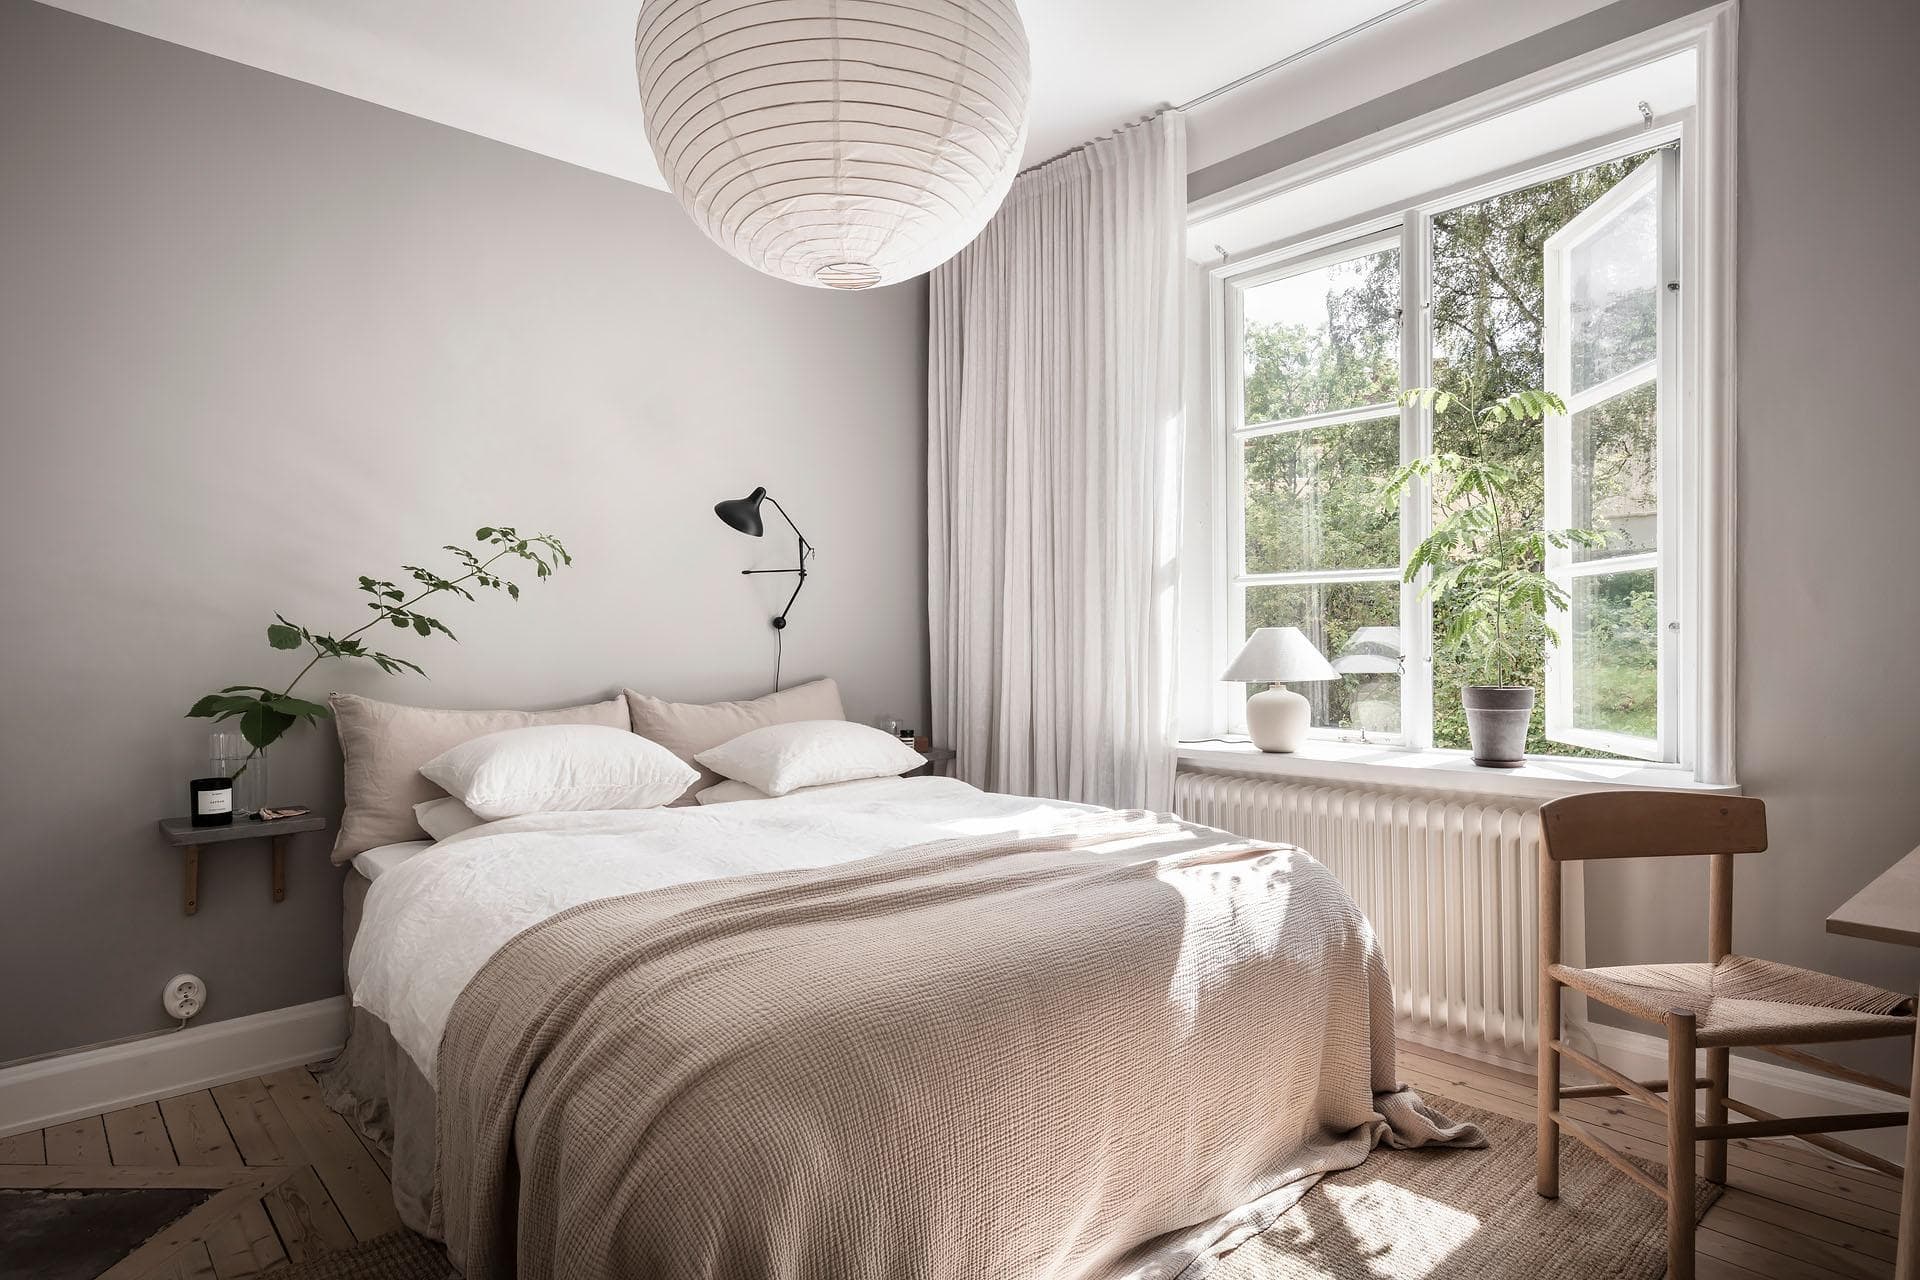 A bedroom with light grey walls, beige bedding, black wall lamp